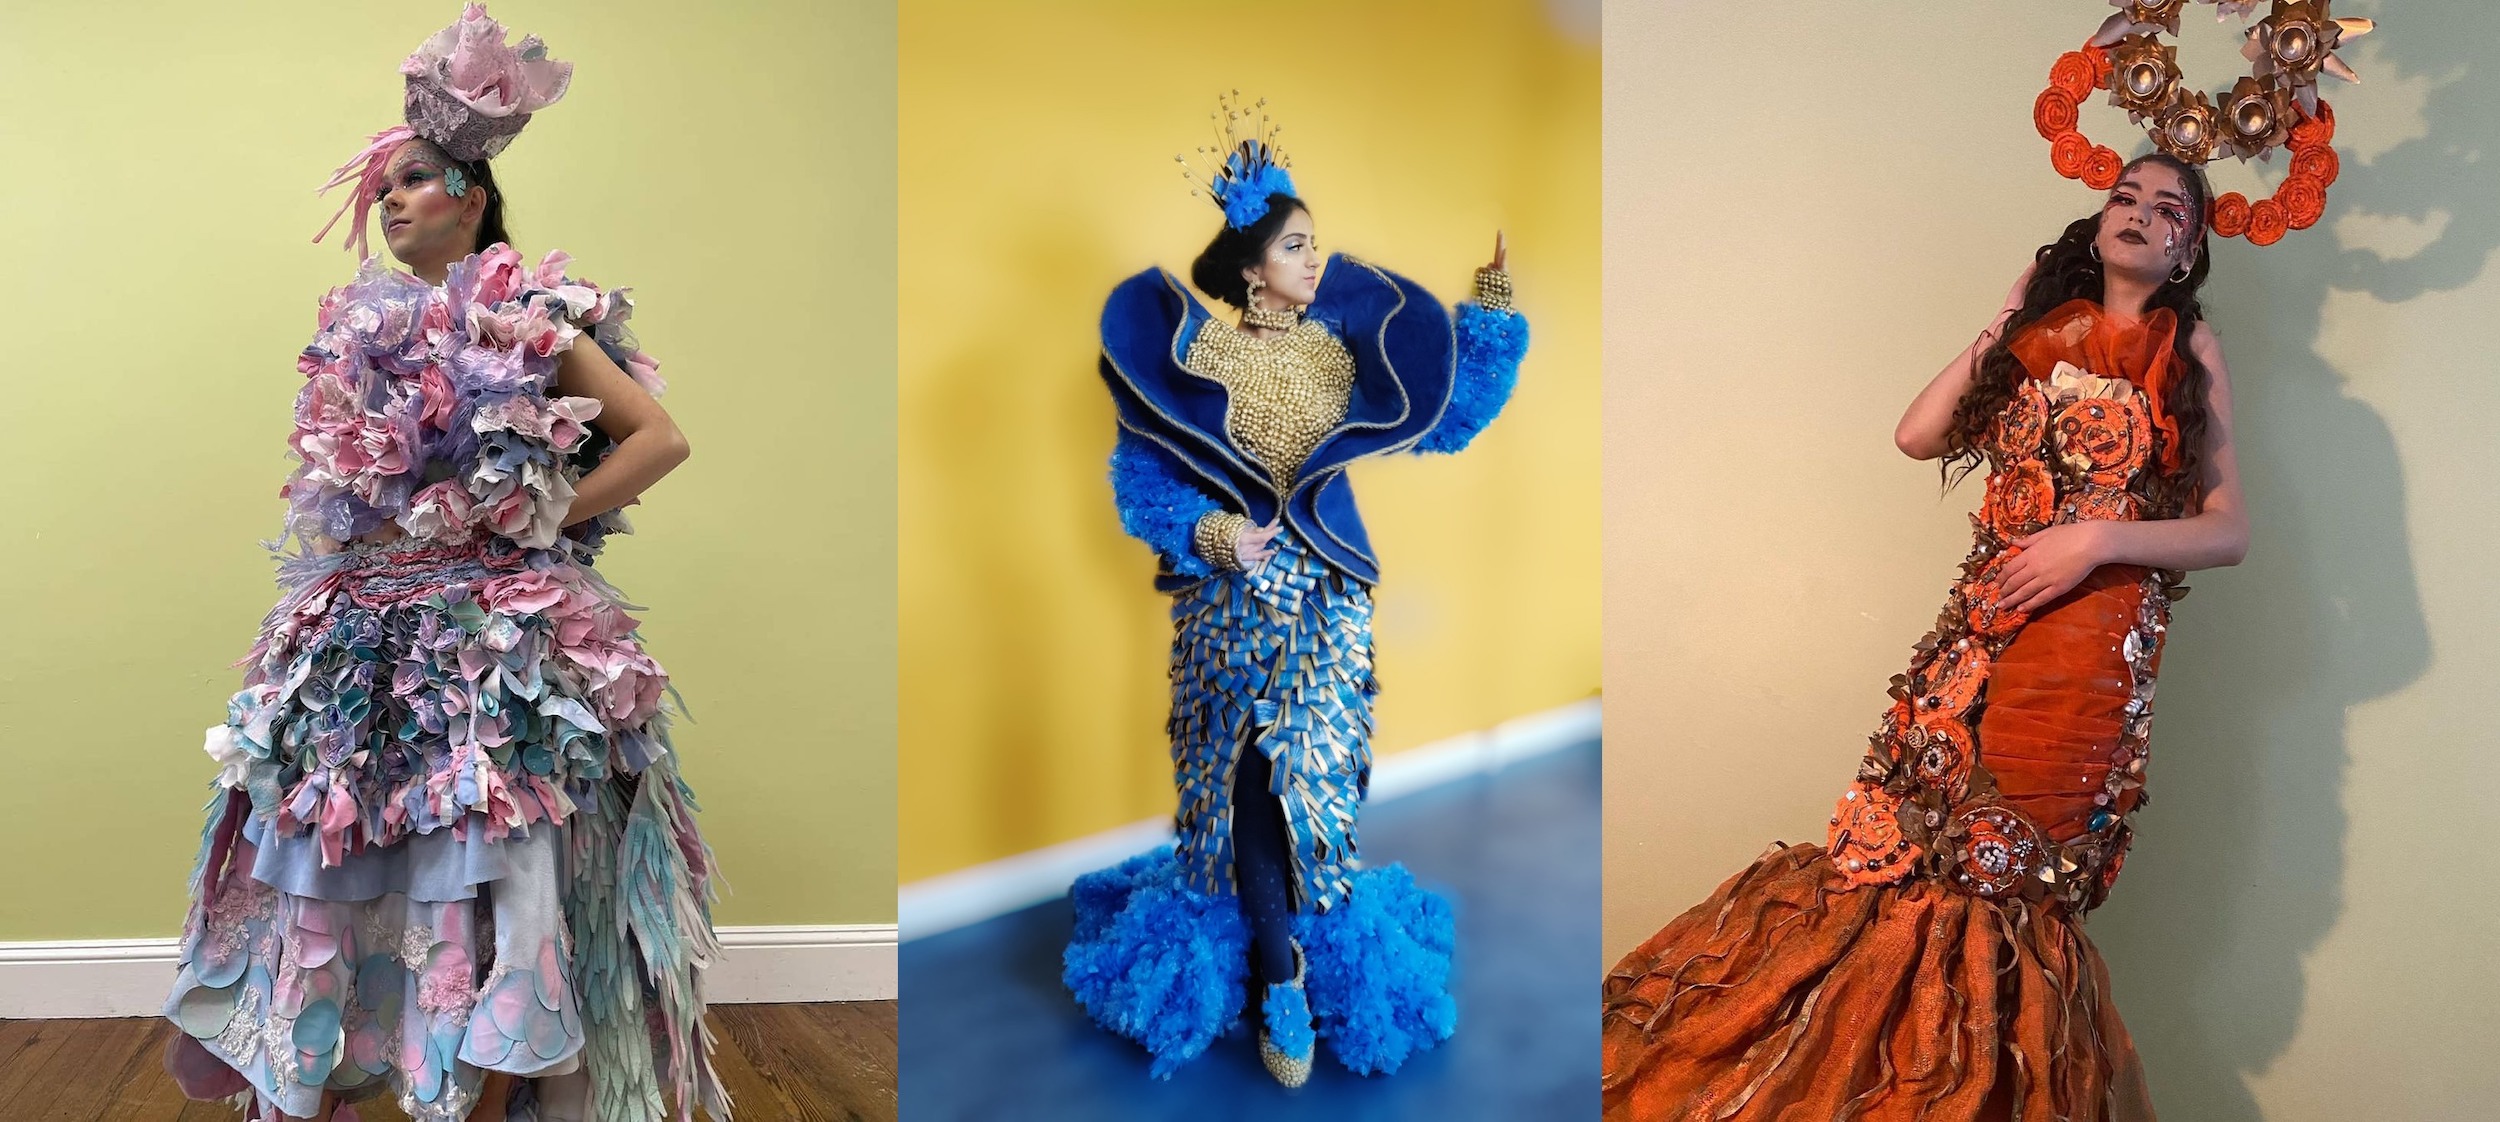 Colaiste Nano Nagle Junk Kouture designs are ready to rock the Digital Regional Finals this March. Pictured above is the designs 'Whats Thrown Around is Twirled Around', 'Ode To Joy' and 'The Global Spiral'.